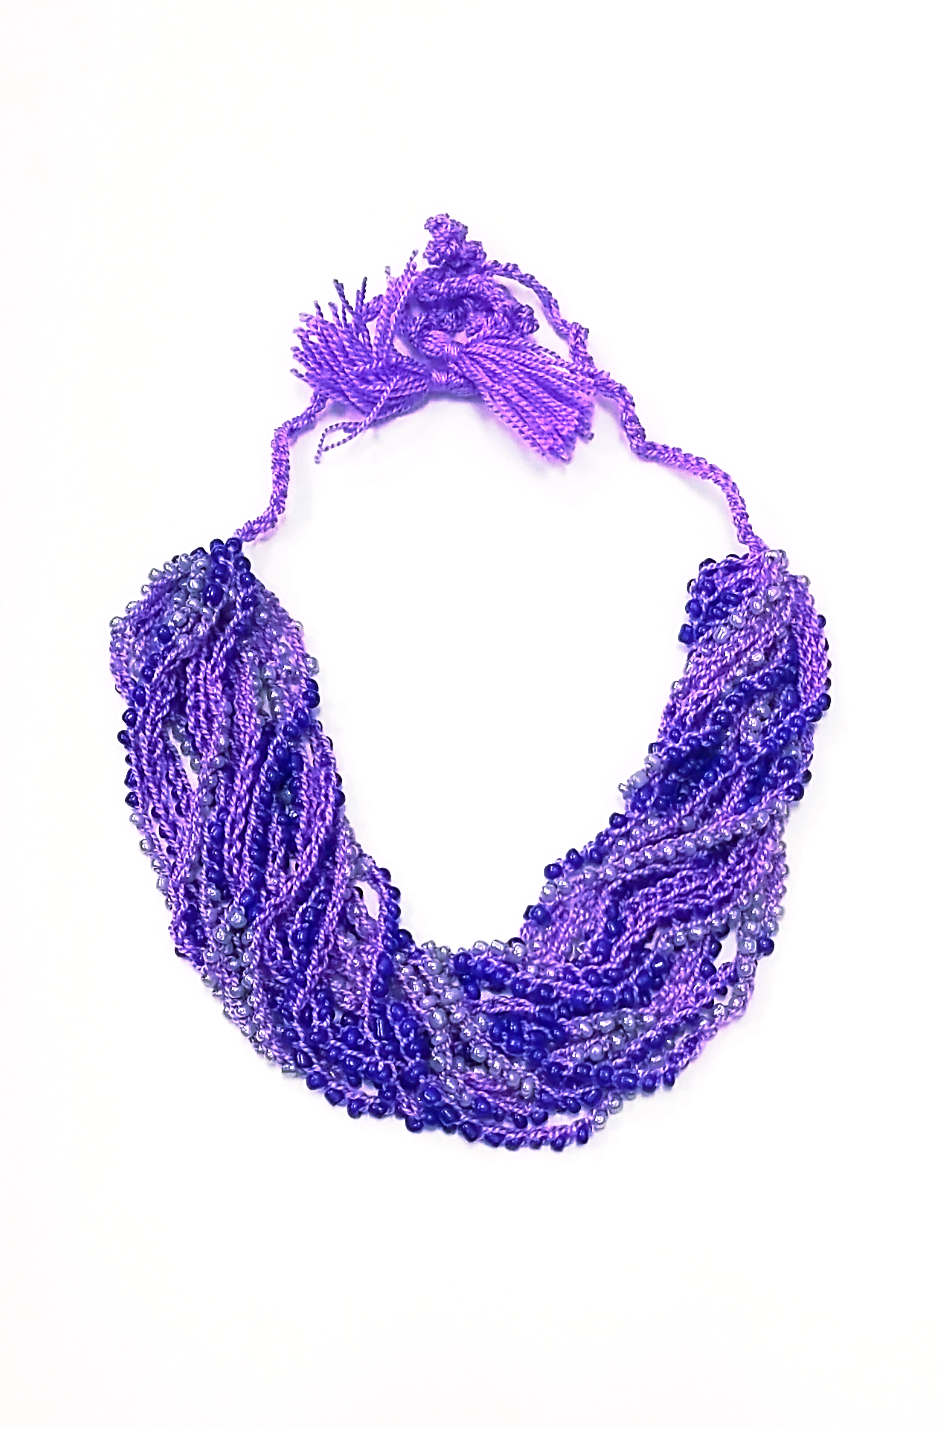 Artisan crafted woven bead necklace. Purple